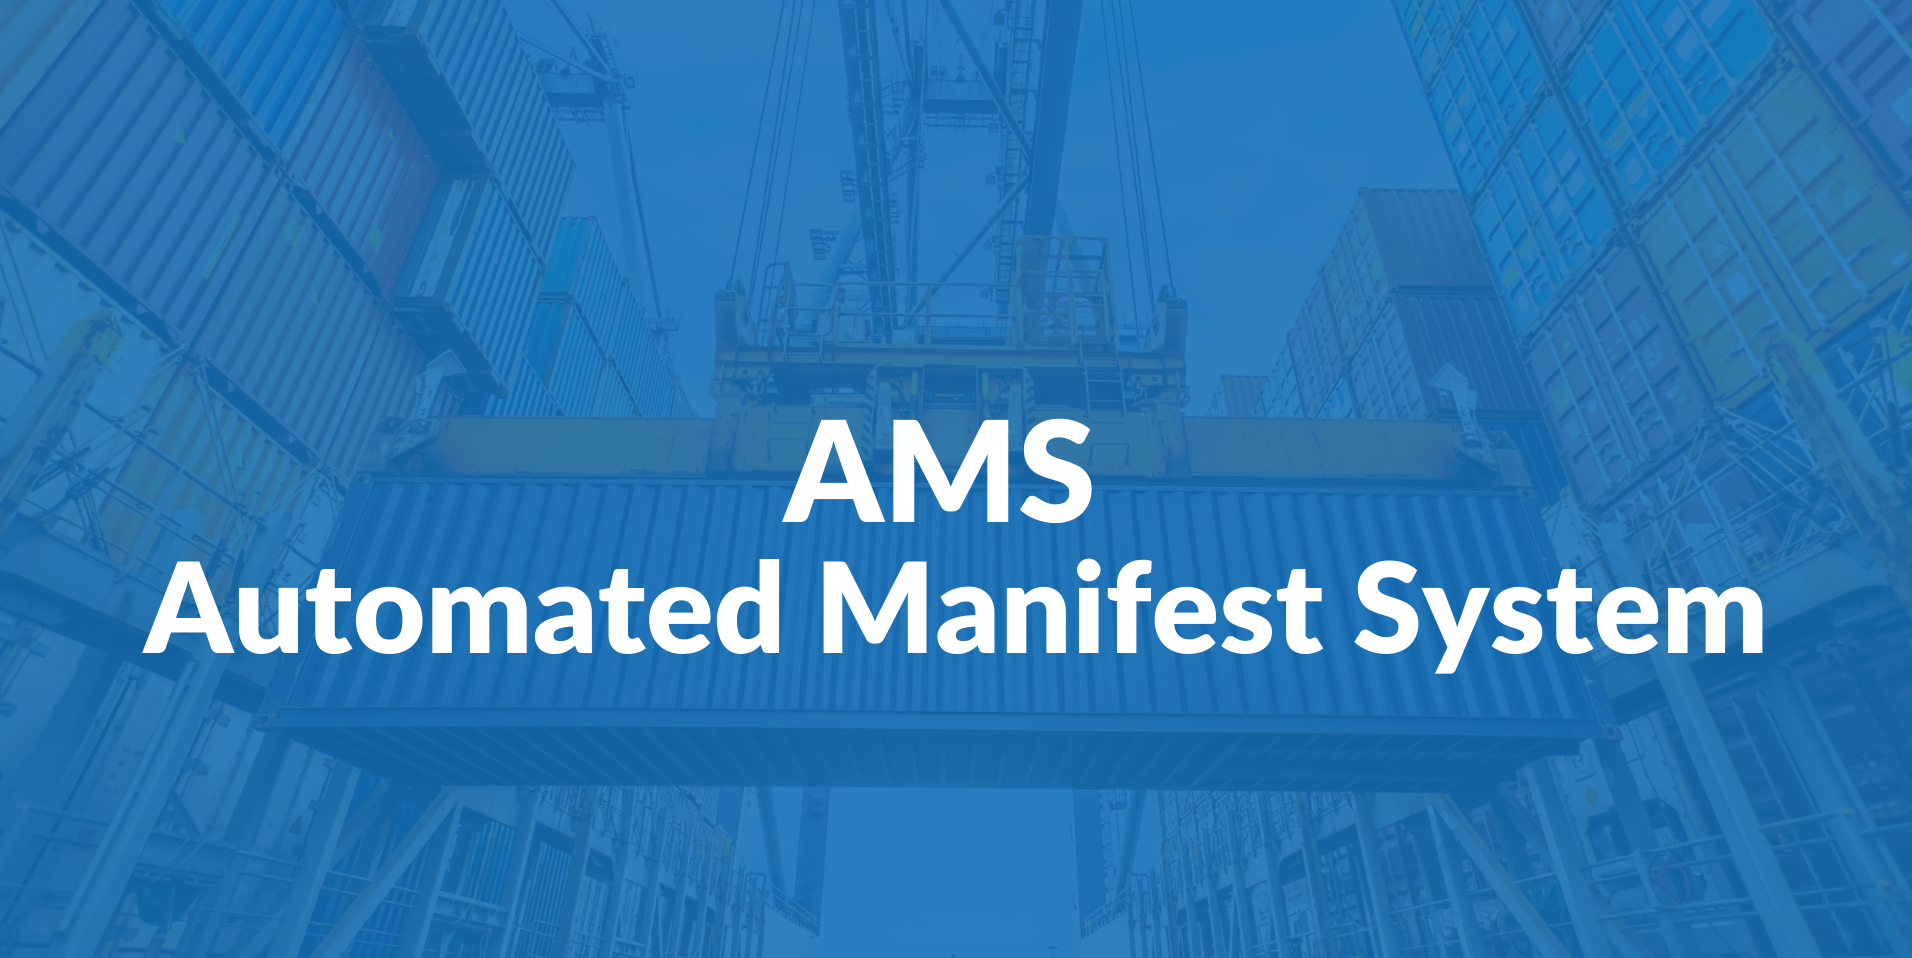 AMS - Automated Manifest System